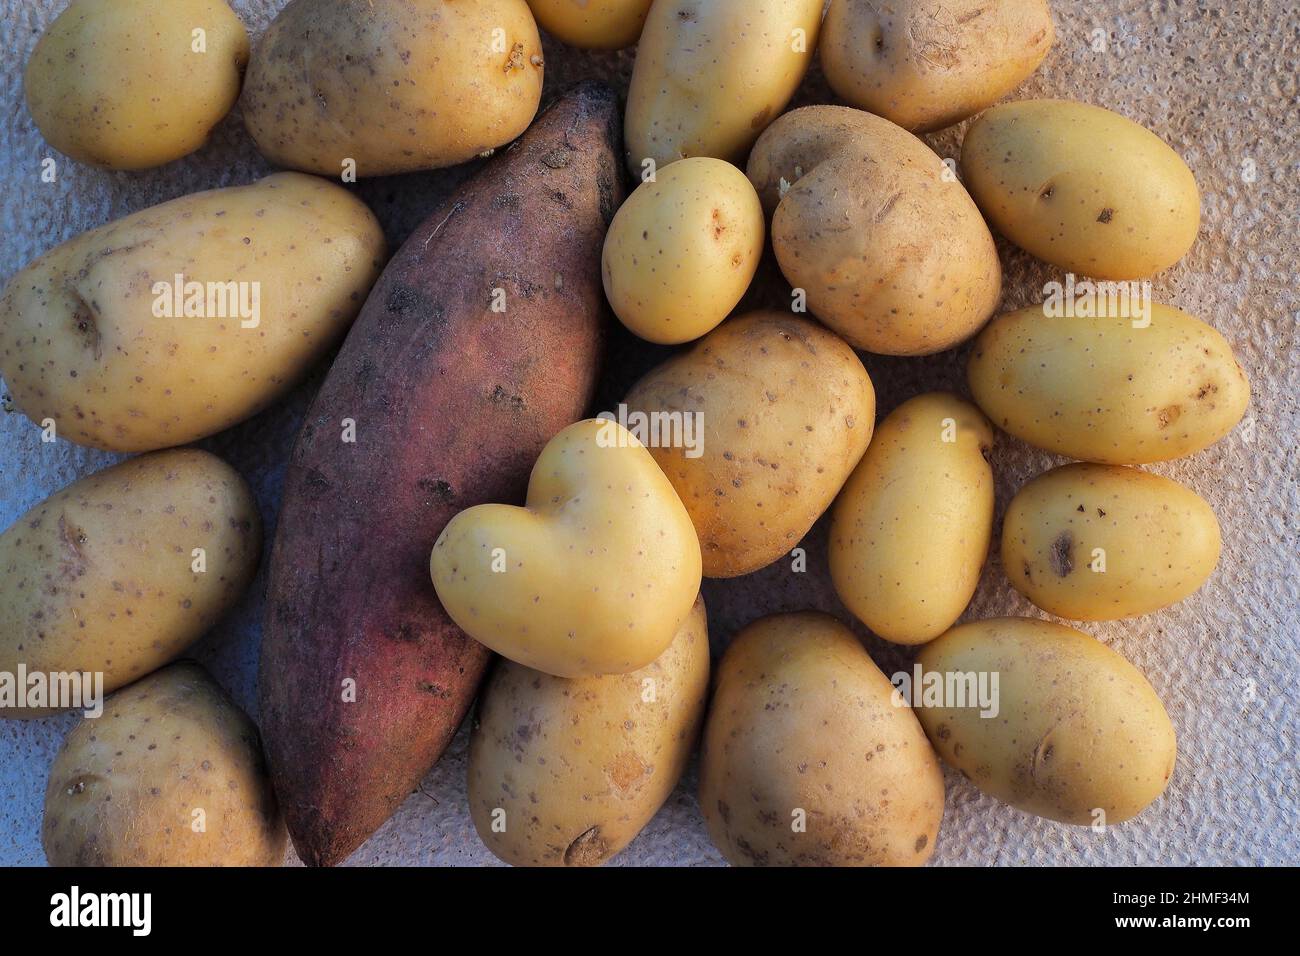 Several potato varieties, vegetables from above, top view, close-up Stock Photo